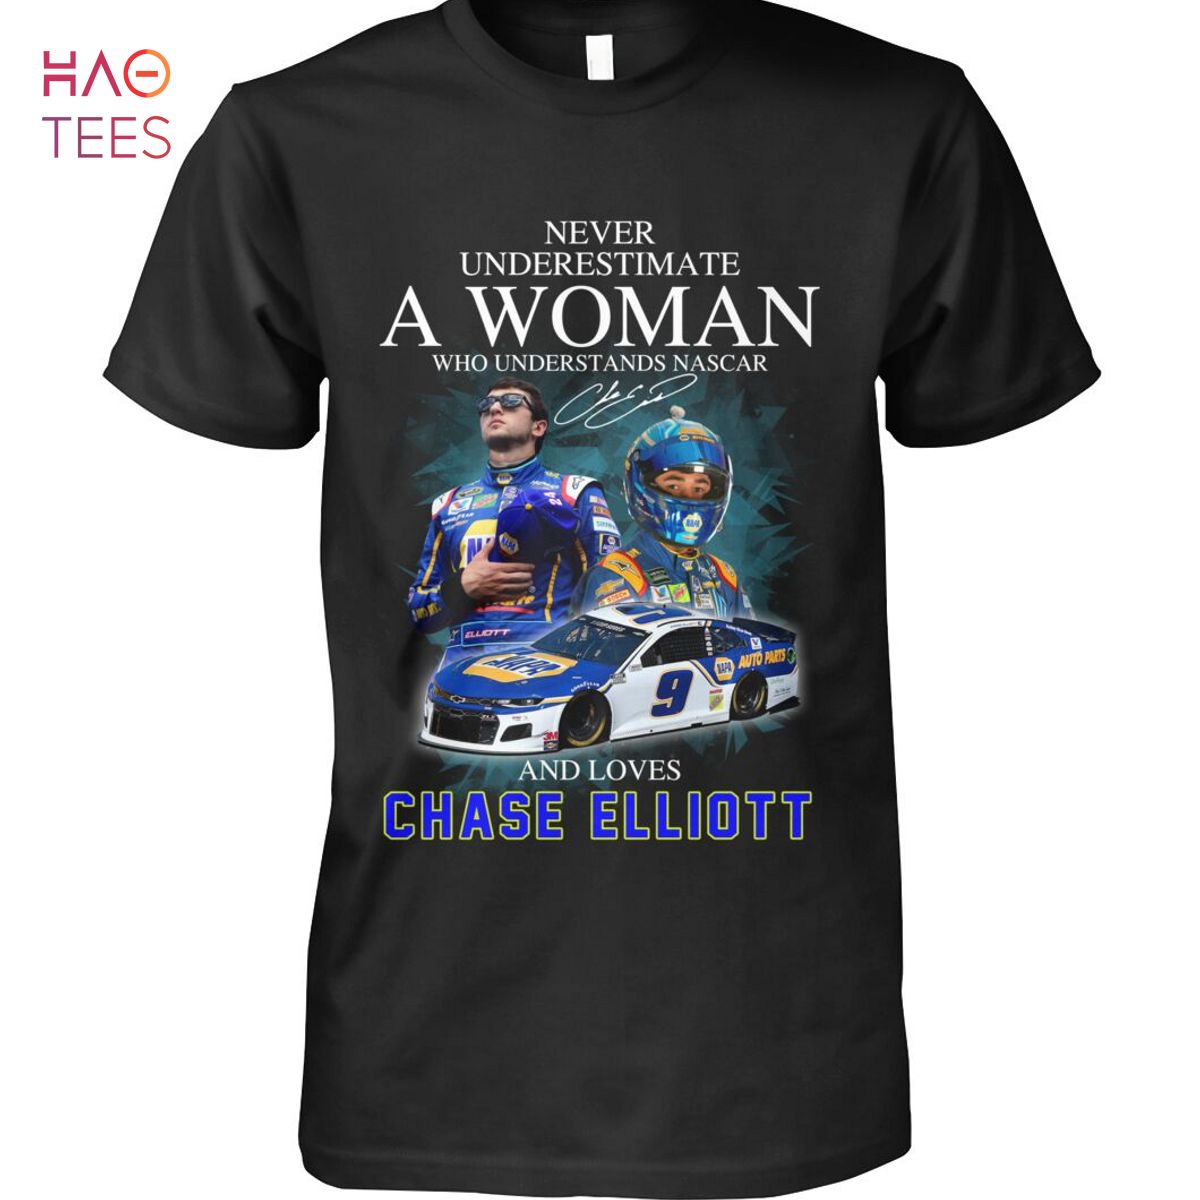 THE BEST Chase Elloott Shirt Limited Edition